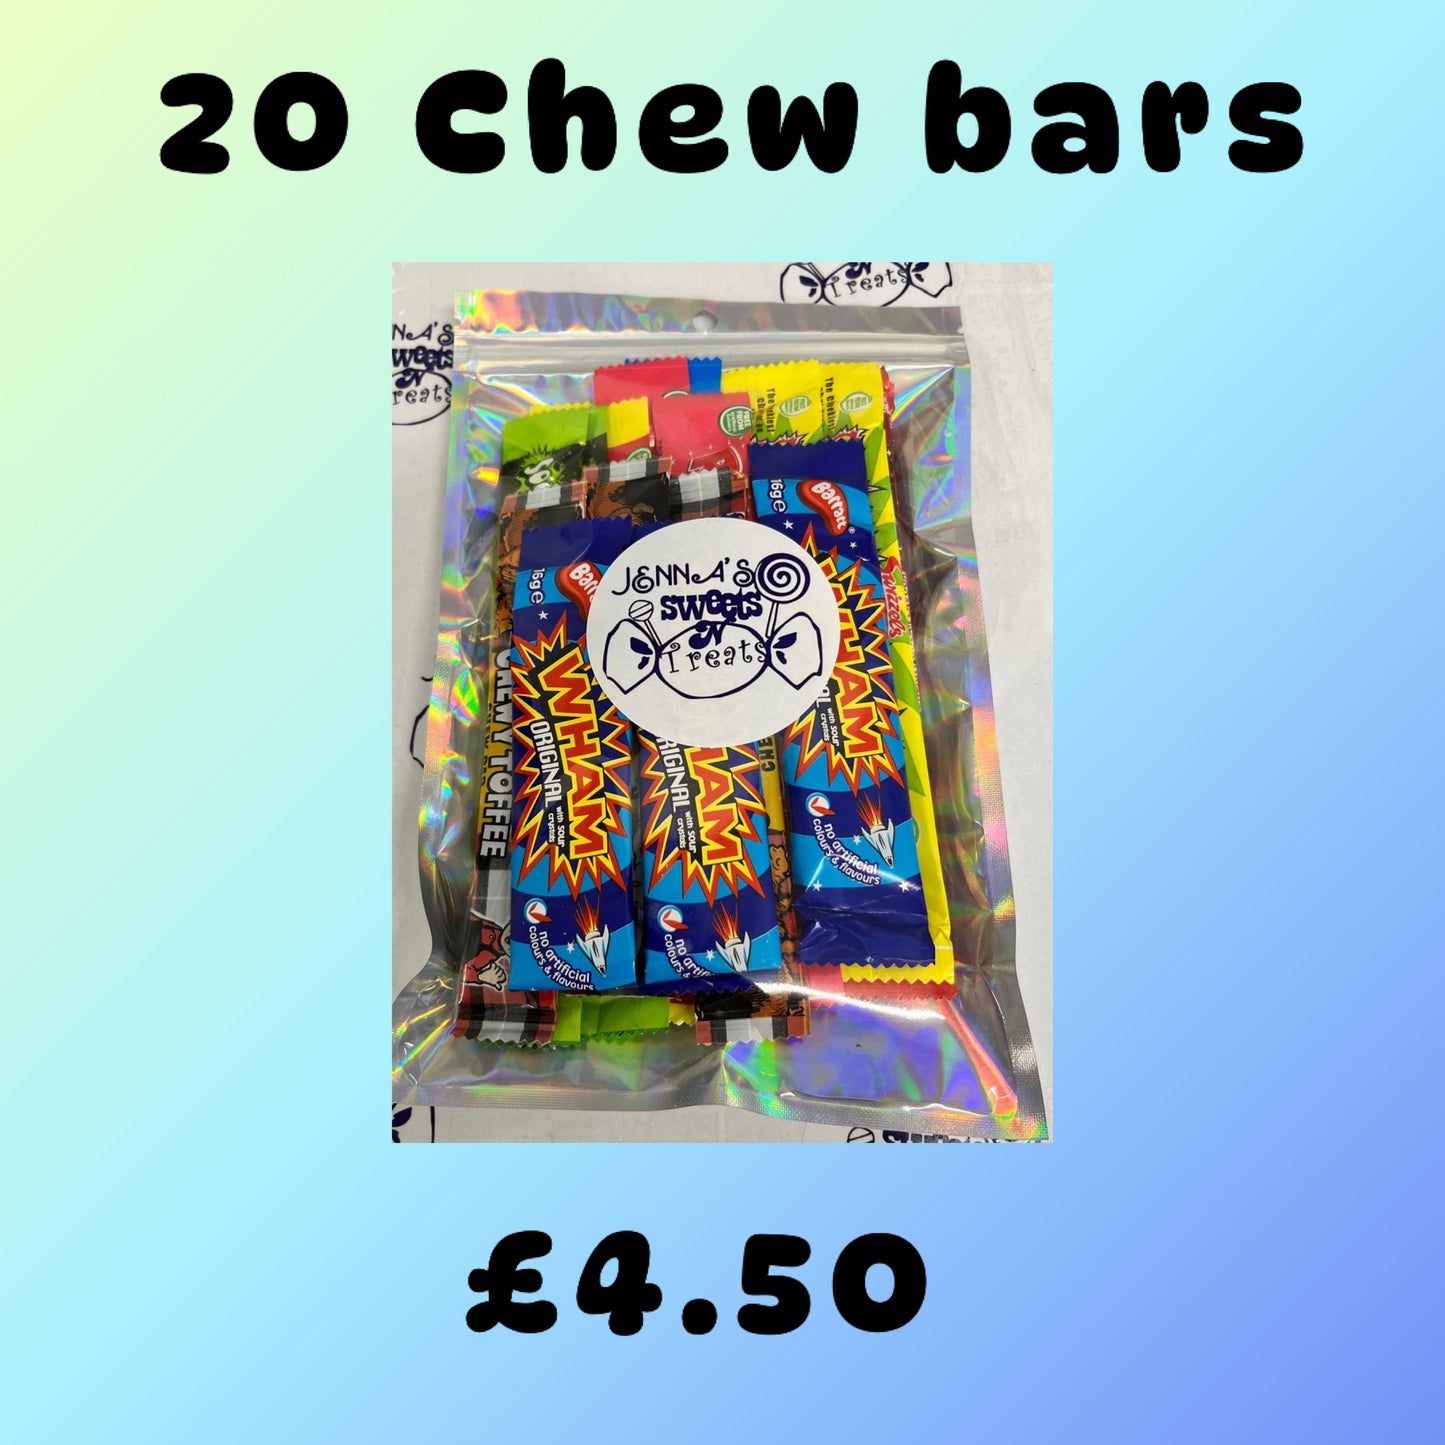 Chewy bar mix